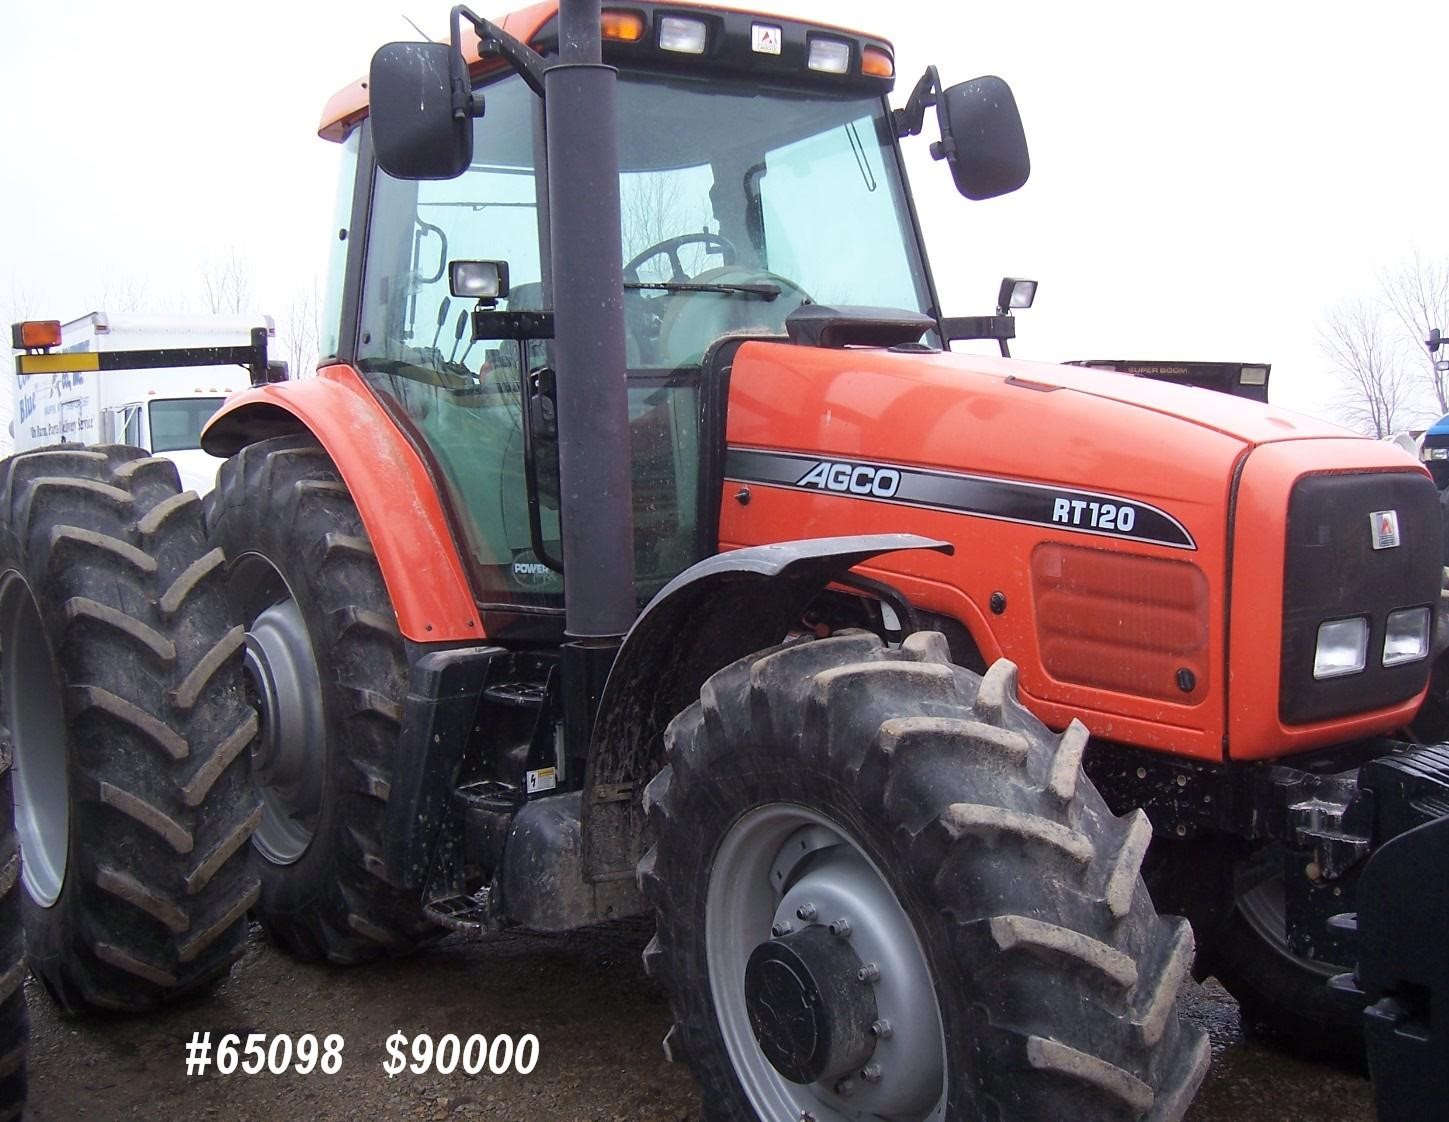 2005 AGCO RT120 100-174 HP Tractor | 1400 hrs. $80,000.00